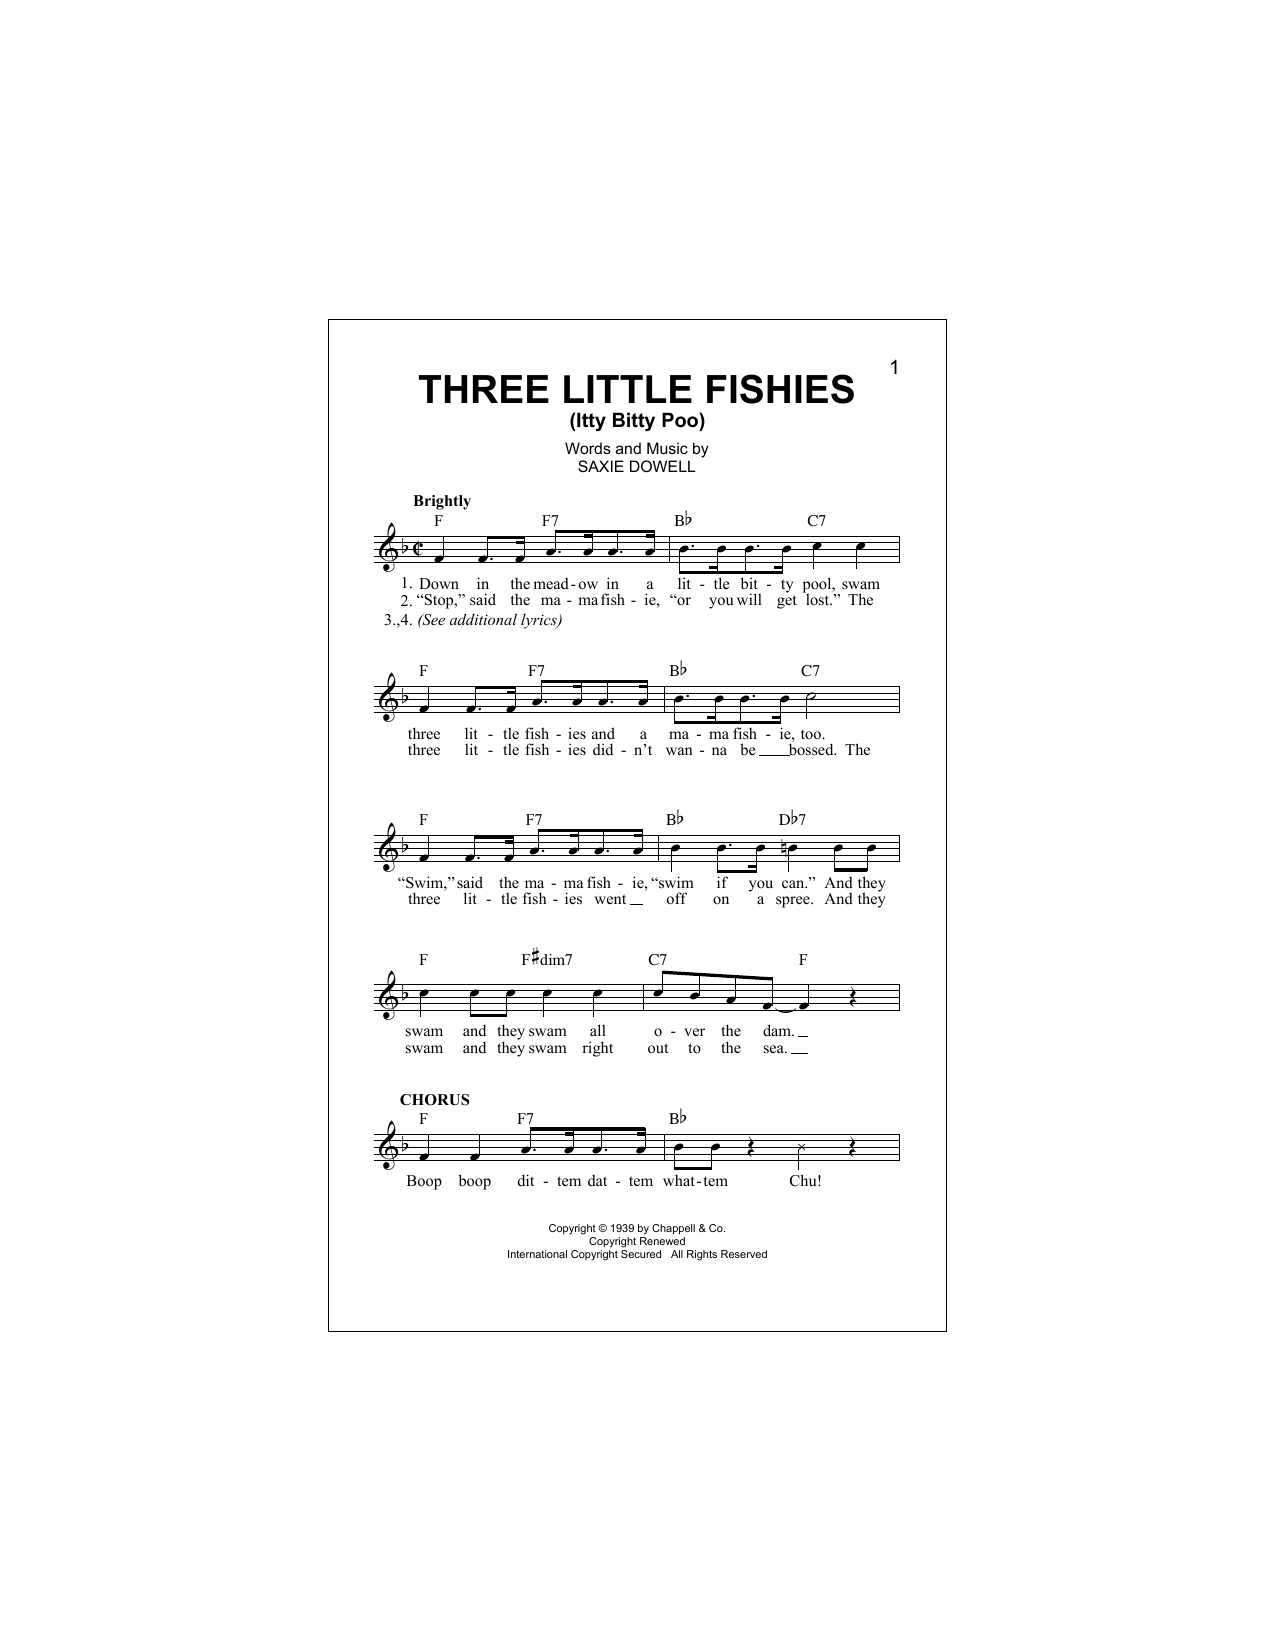 Download Saxie Dowell Three Little Fishies Sheet Music